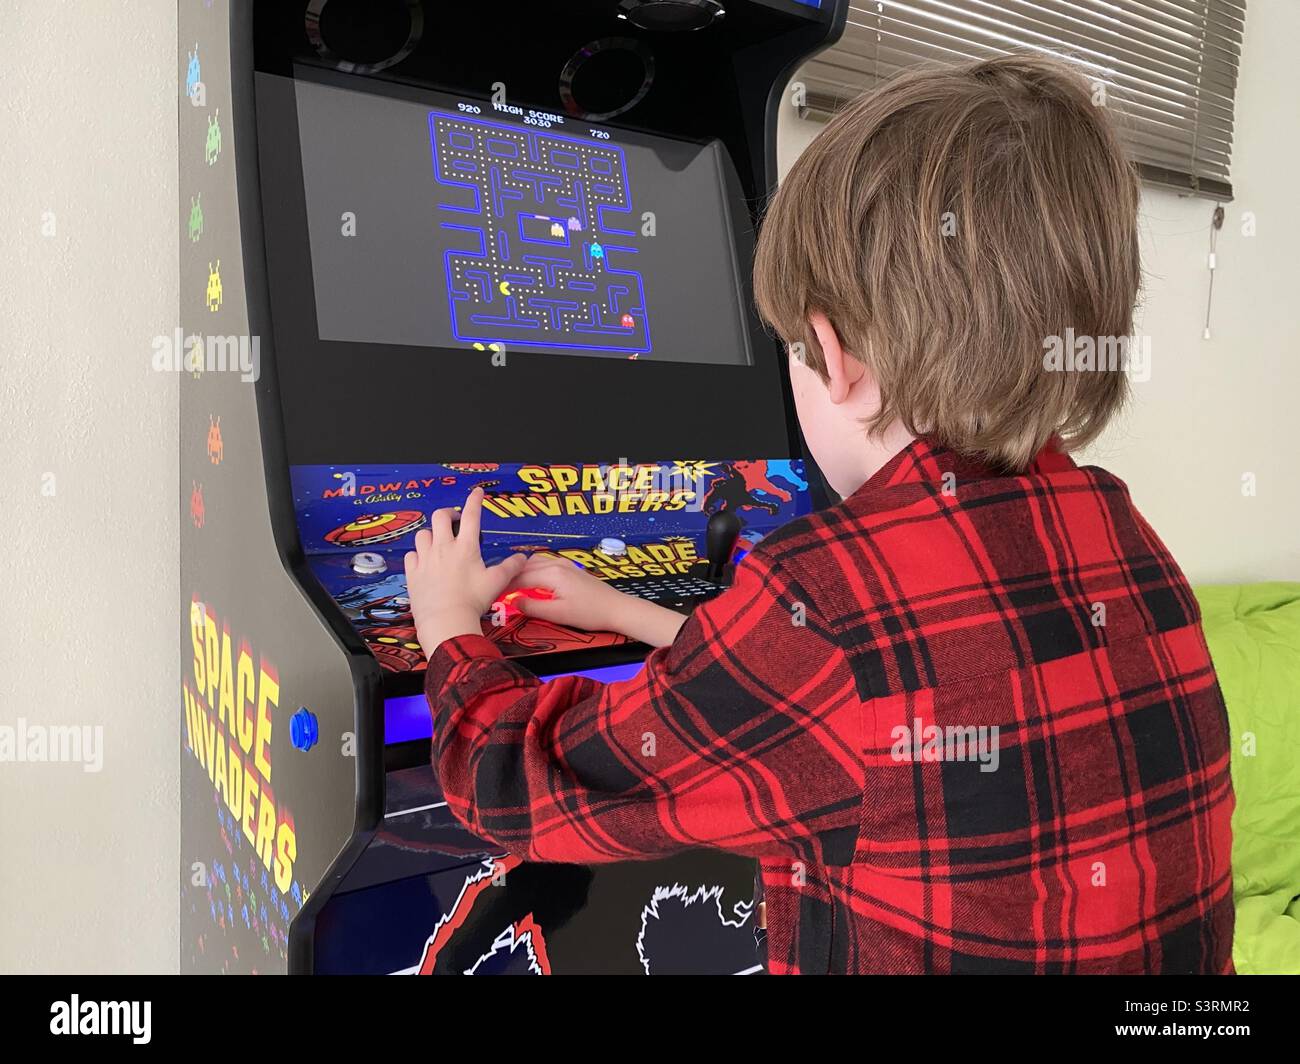 Young boy playing on a video arcade game Stock Photo